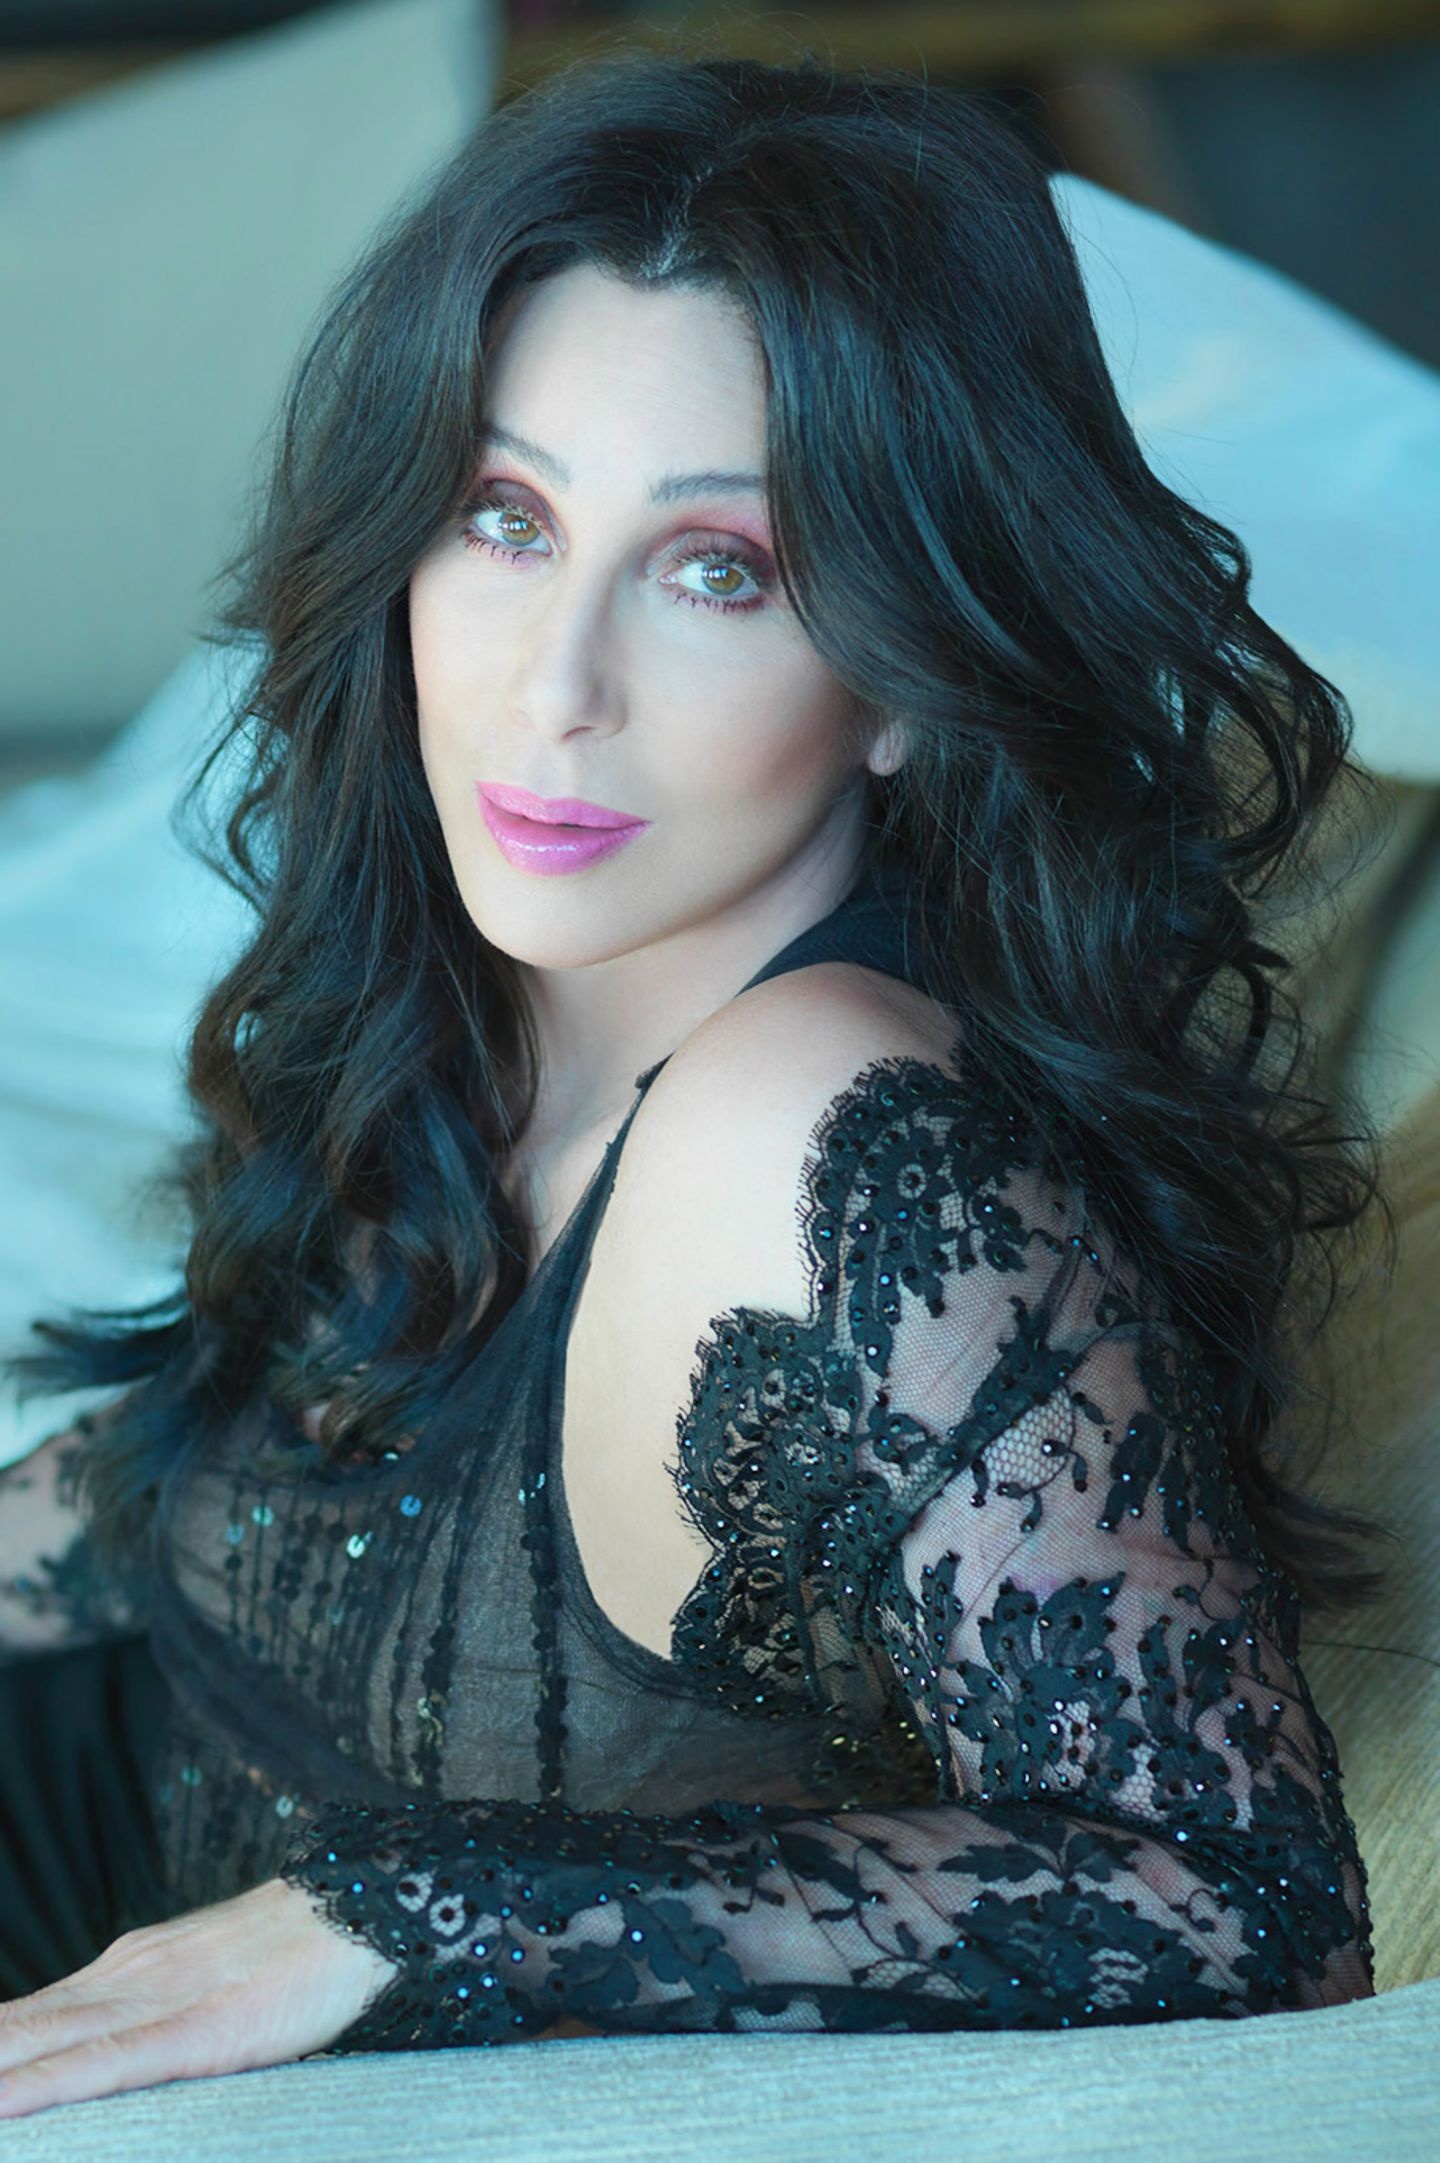 Cher: An iconic performer both as a musician and an actress, A contralto singing voice. 1440x2170 HD Wallpaper.